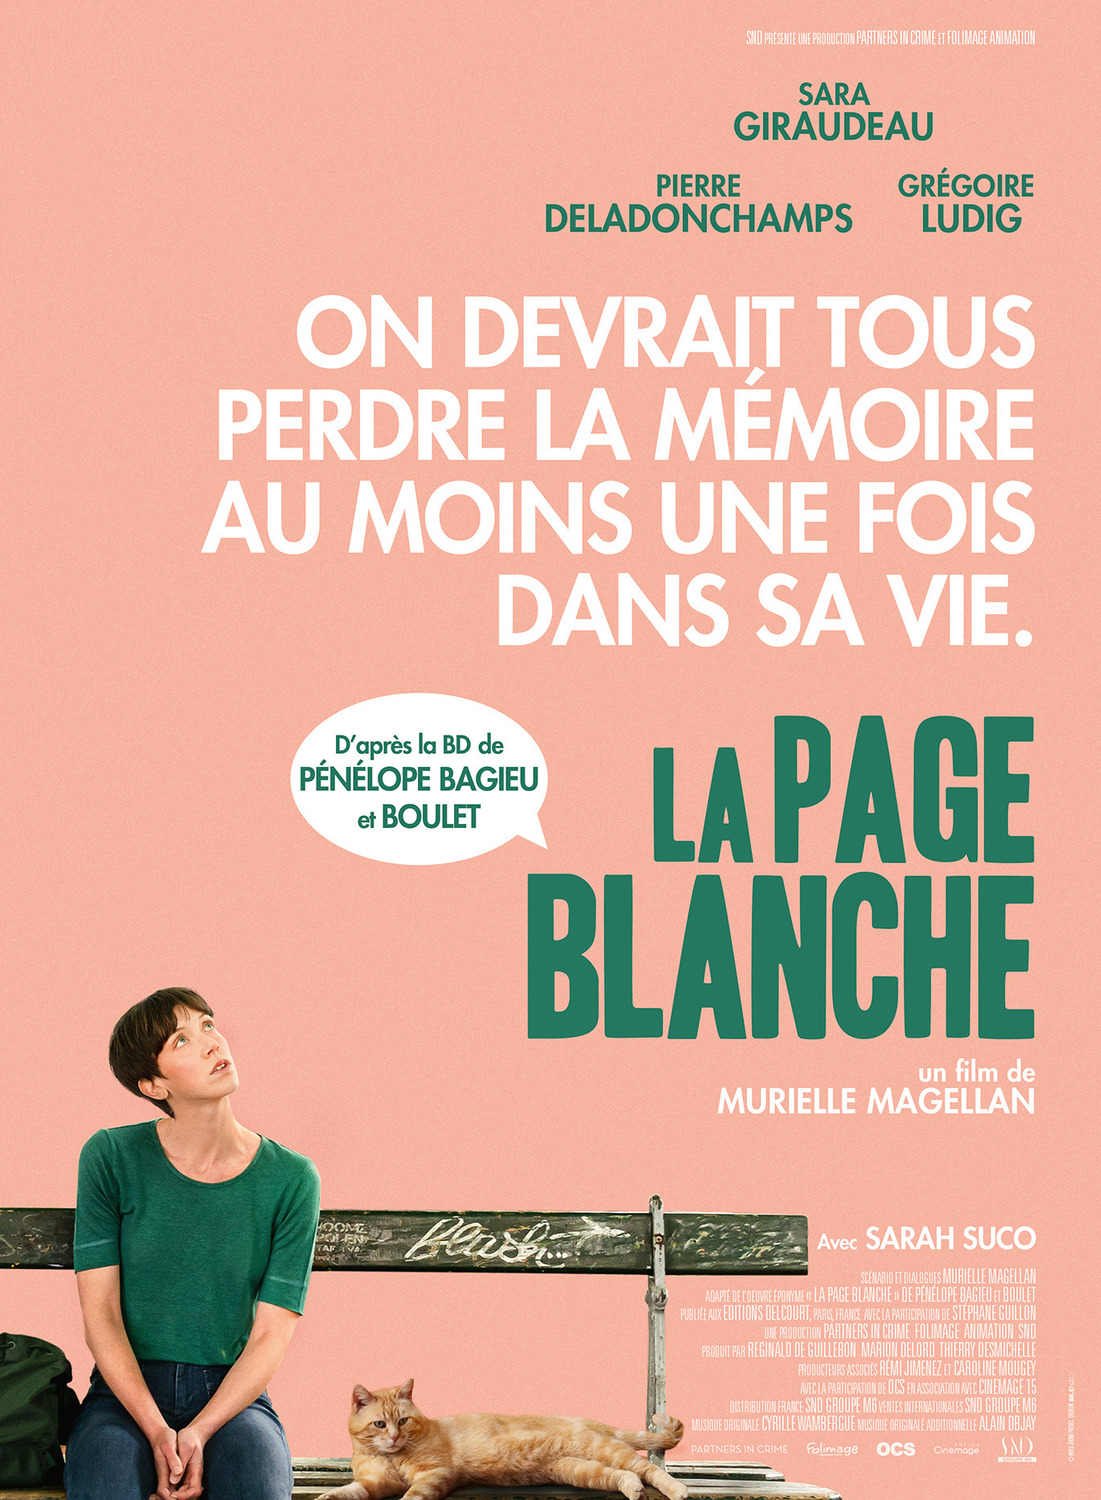 Extra Large Movie Poster Image for La page blanche 